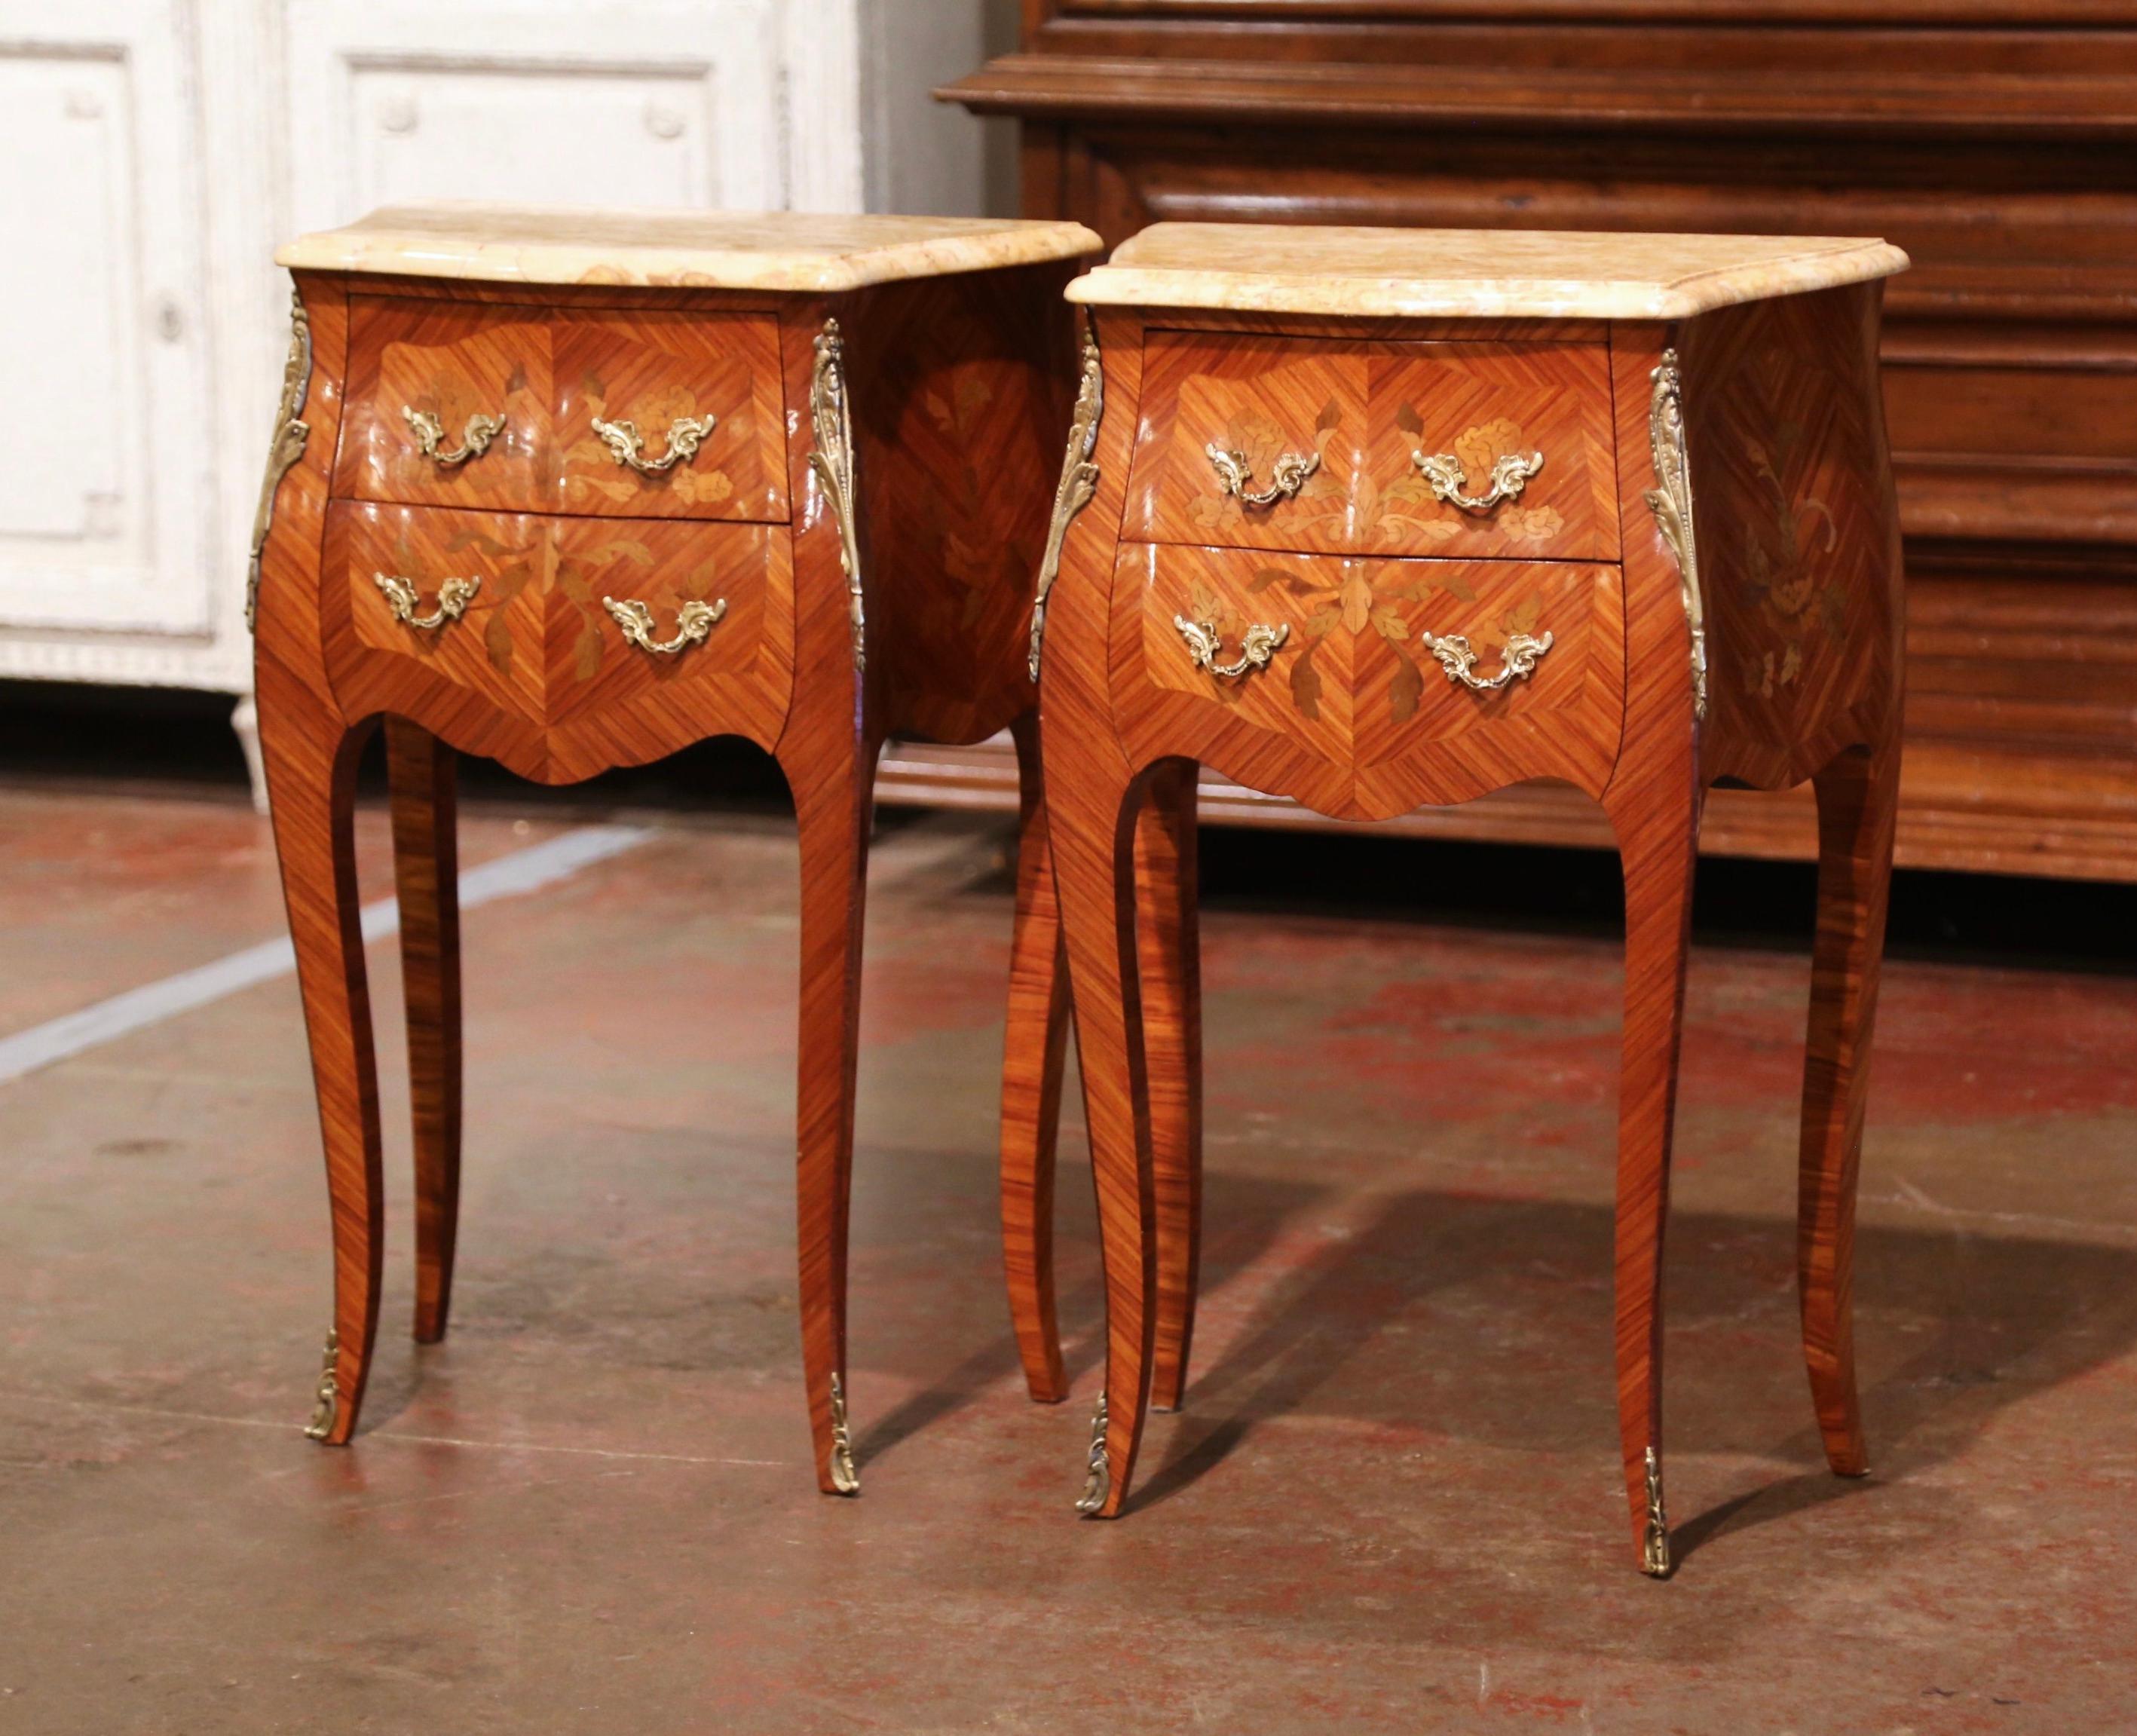 These elegant bedside tables were created in France, circa 1960. Bombe in shape on all three sides, each fruitwood cabinet stands on cabriole legs ending with front brass sabot feet; both sides with serpentine shape have inlaid veneer chevron